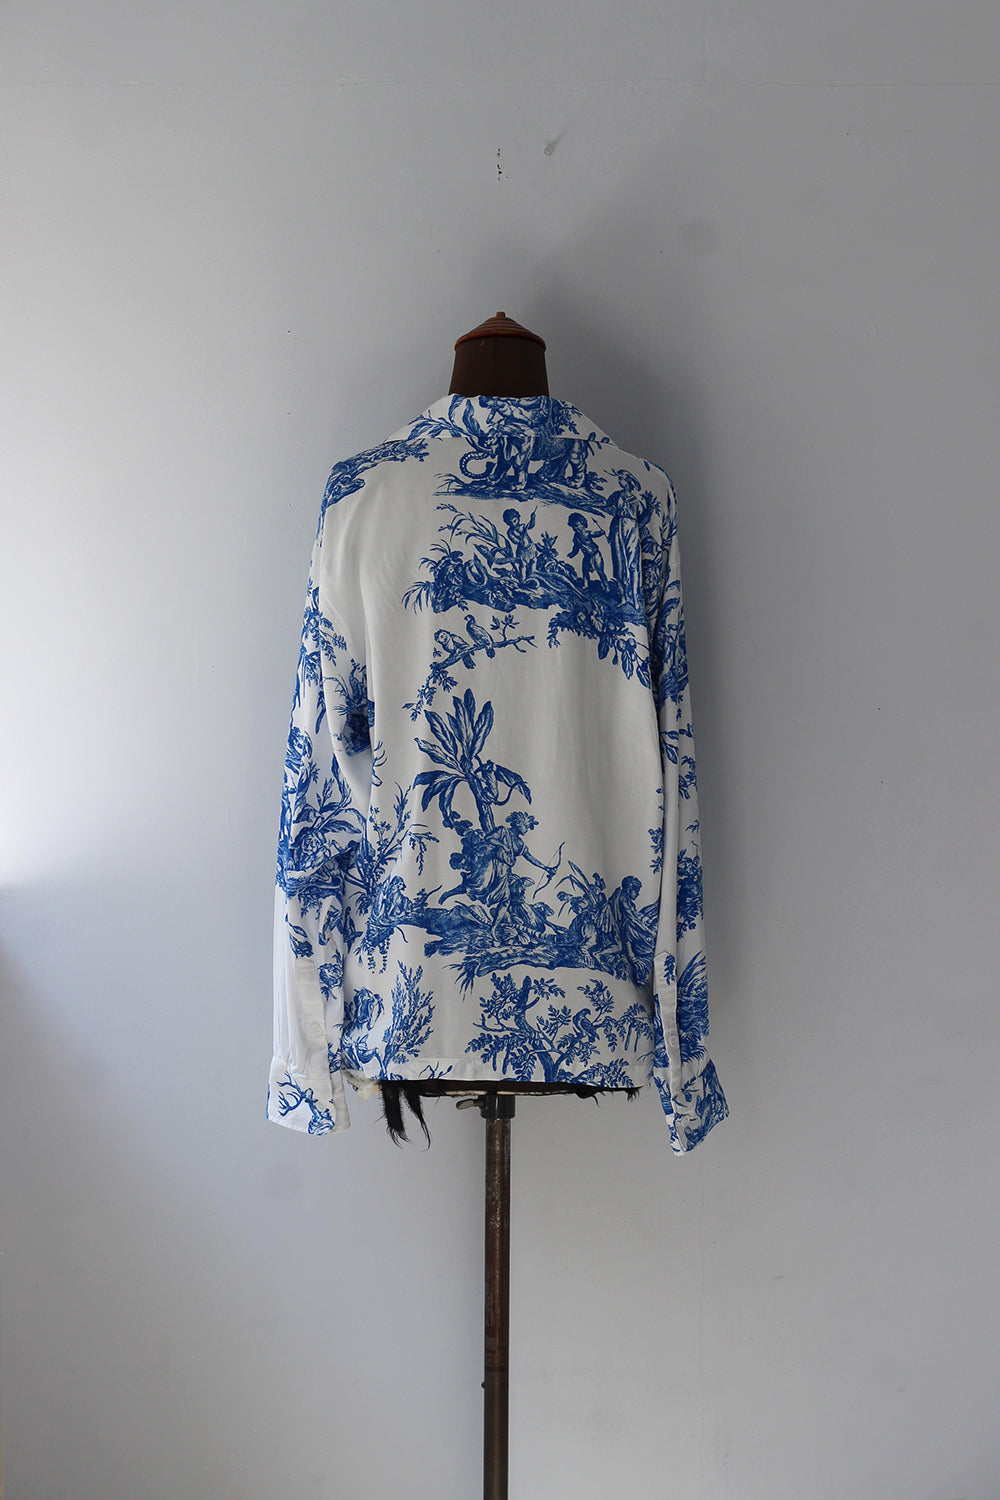 UNUSED "4 continents print long sleeve shirt" (white×blue)